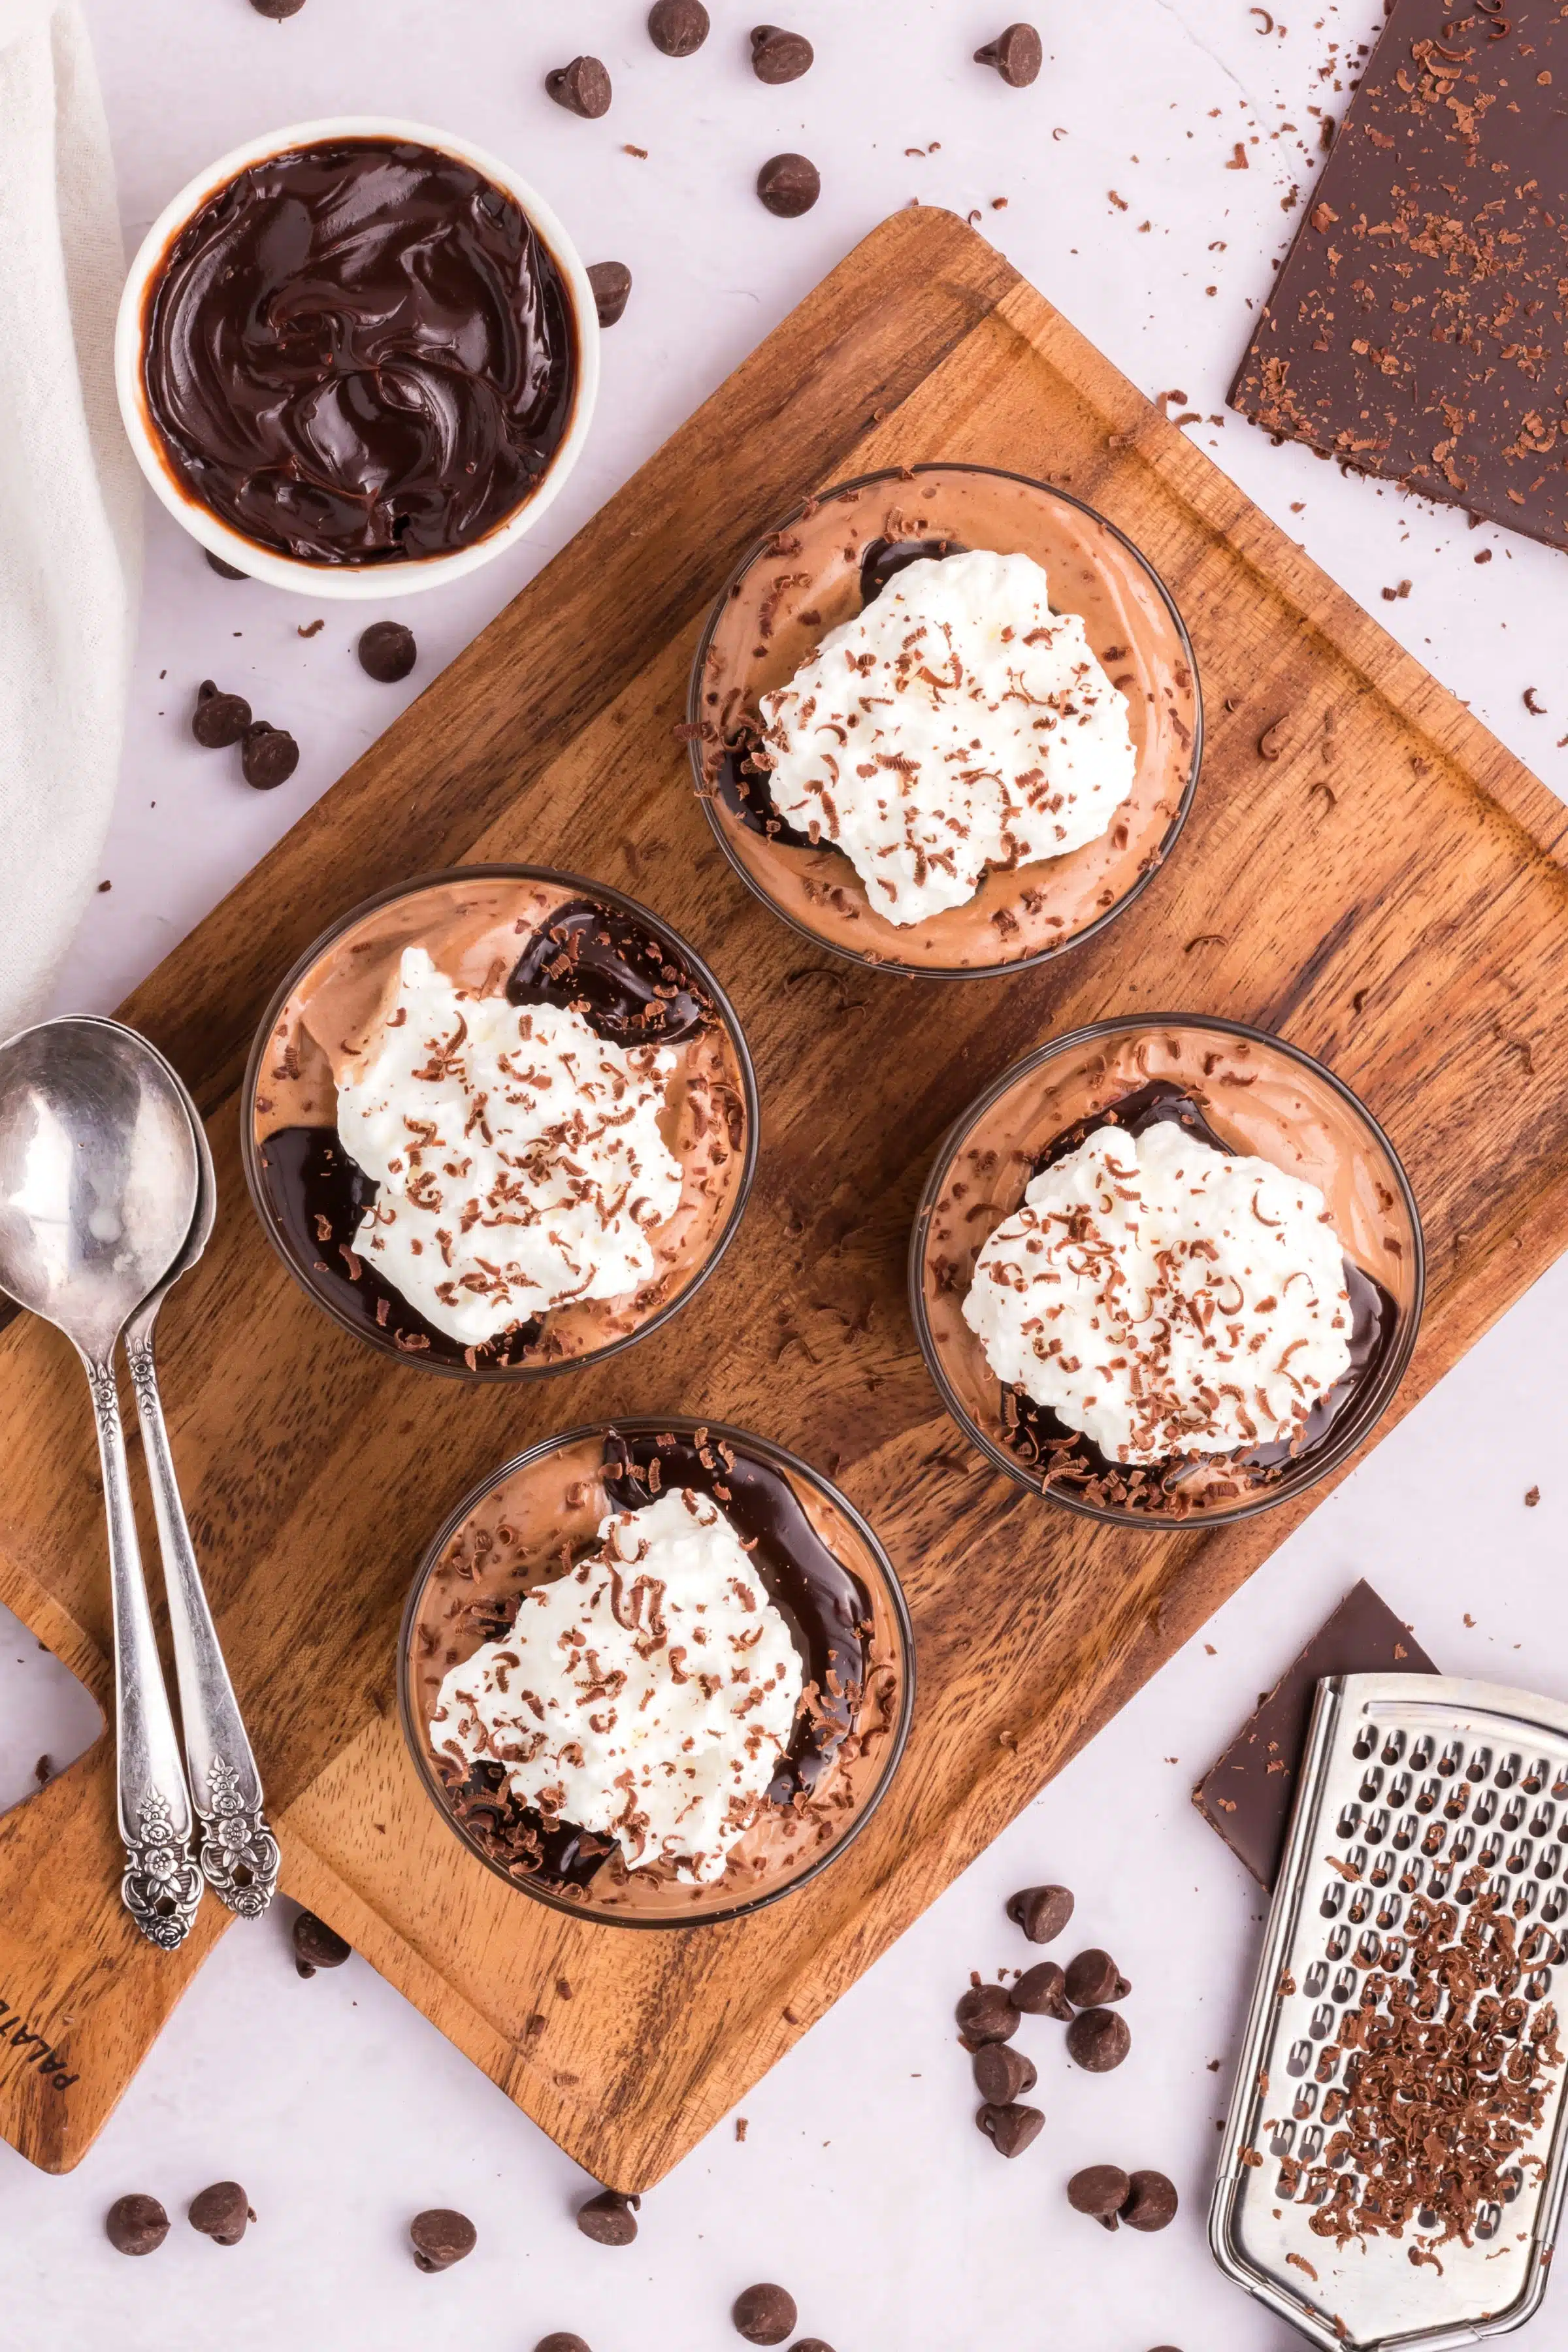 Four glass cups on a rustic cutting board filled with homemade chocolate mousse and topped with chocolate sauce, homemade whipped cream, and shaved chocolate.